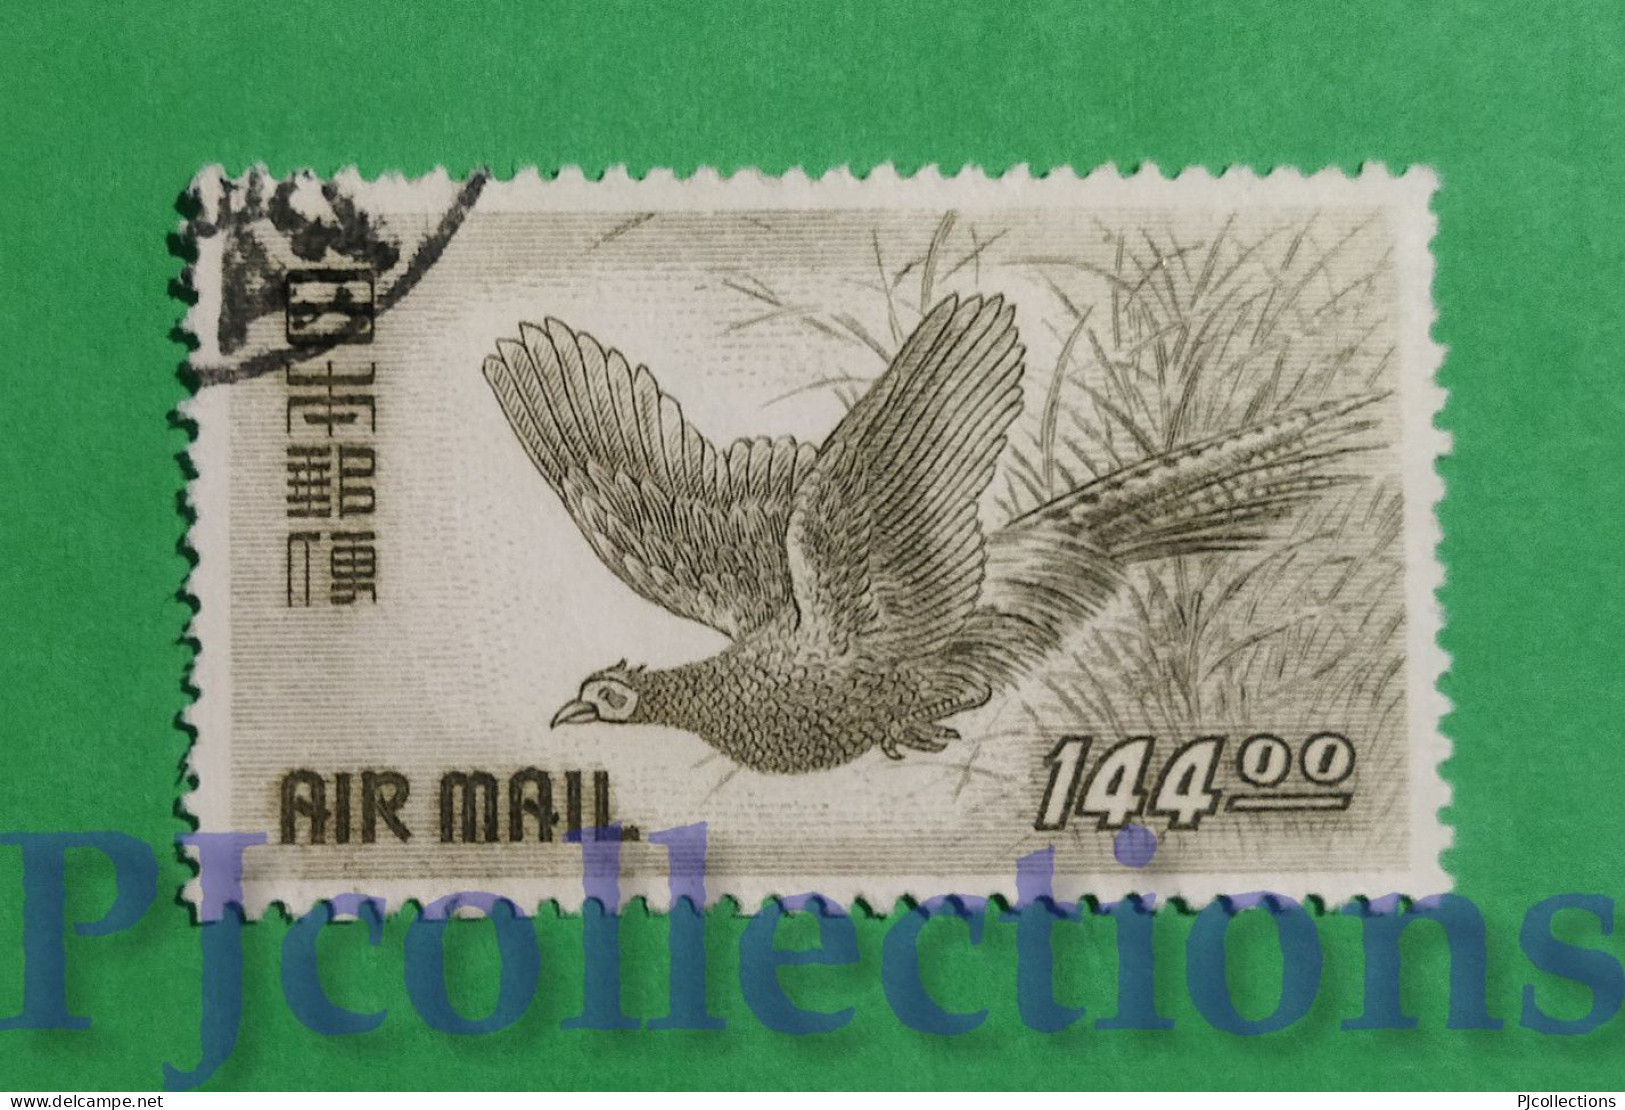 S595 - GIAPPONE - JAPAN 1950 POSTA AEREA - AIRMAIL 144y USATO - USED - Used Stamps